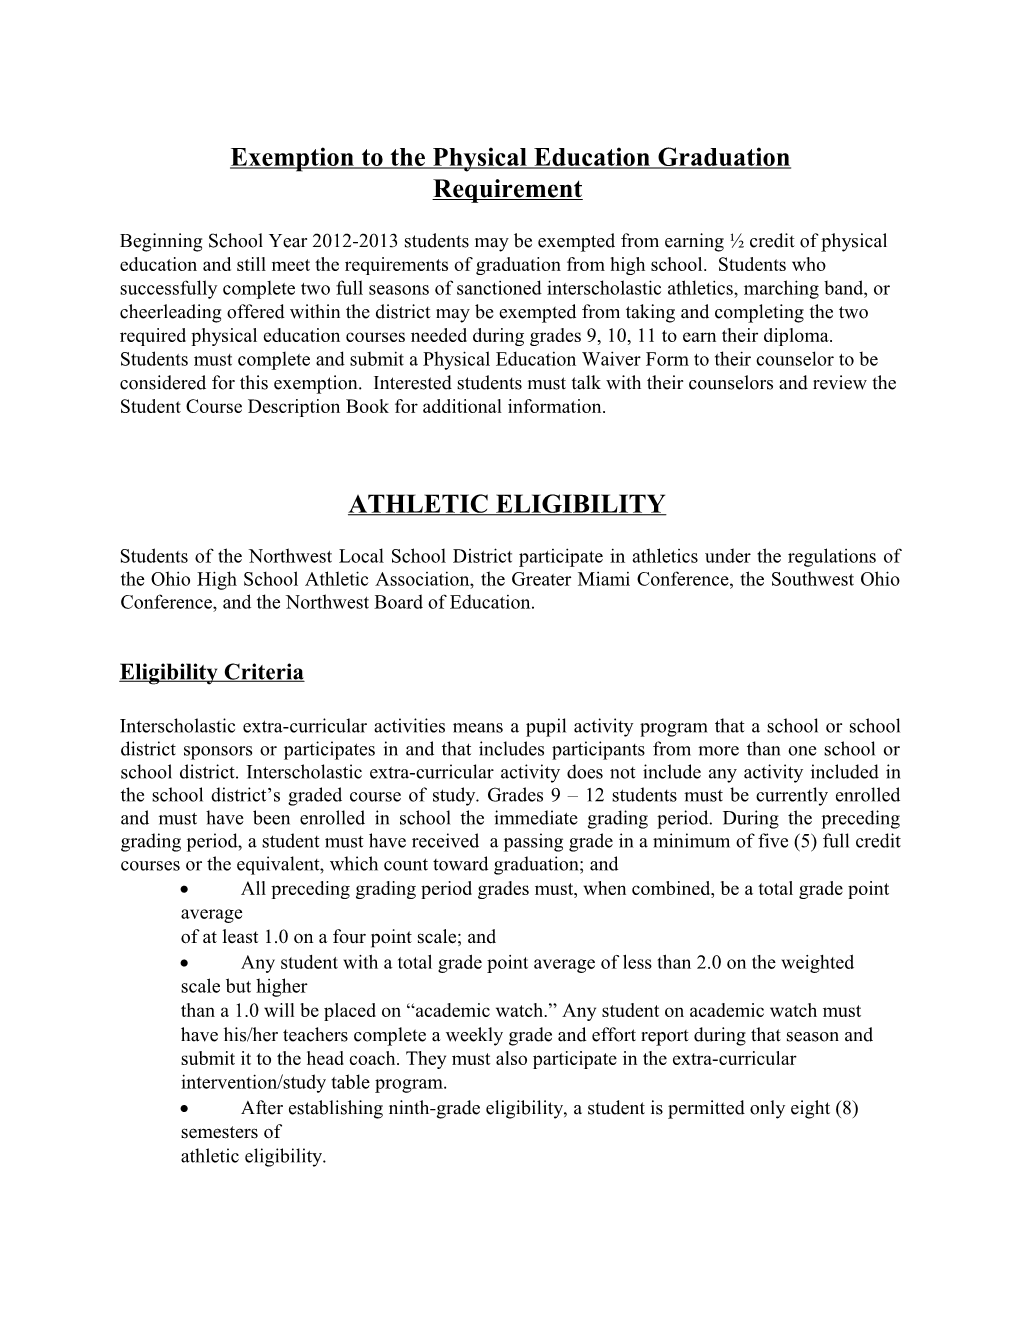 Exemption to the Physical Education Graduation Requirement